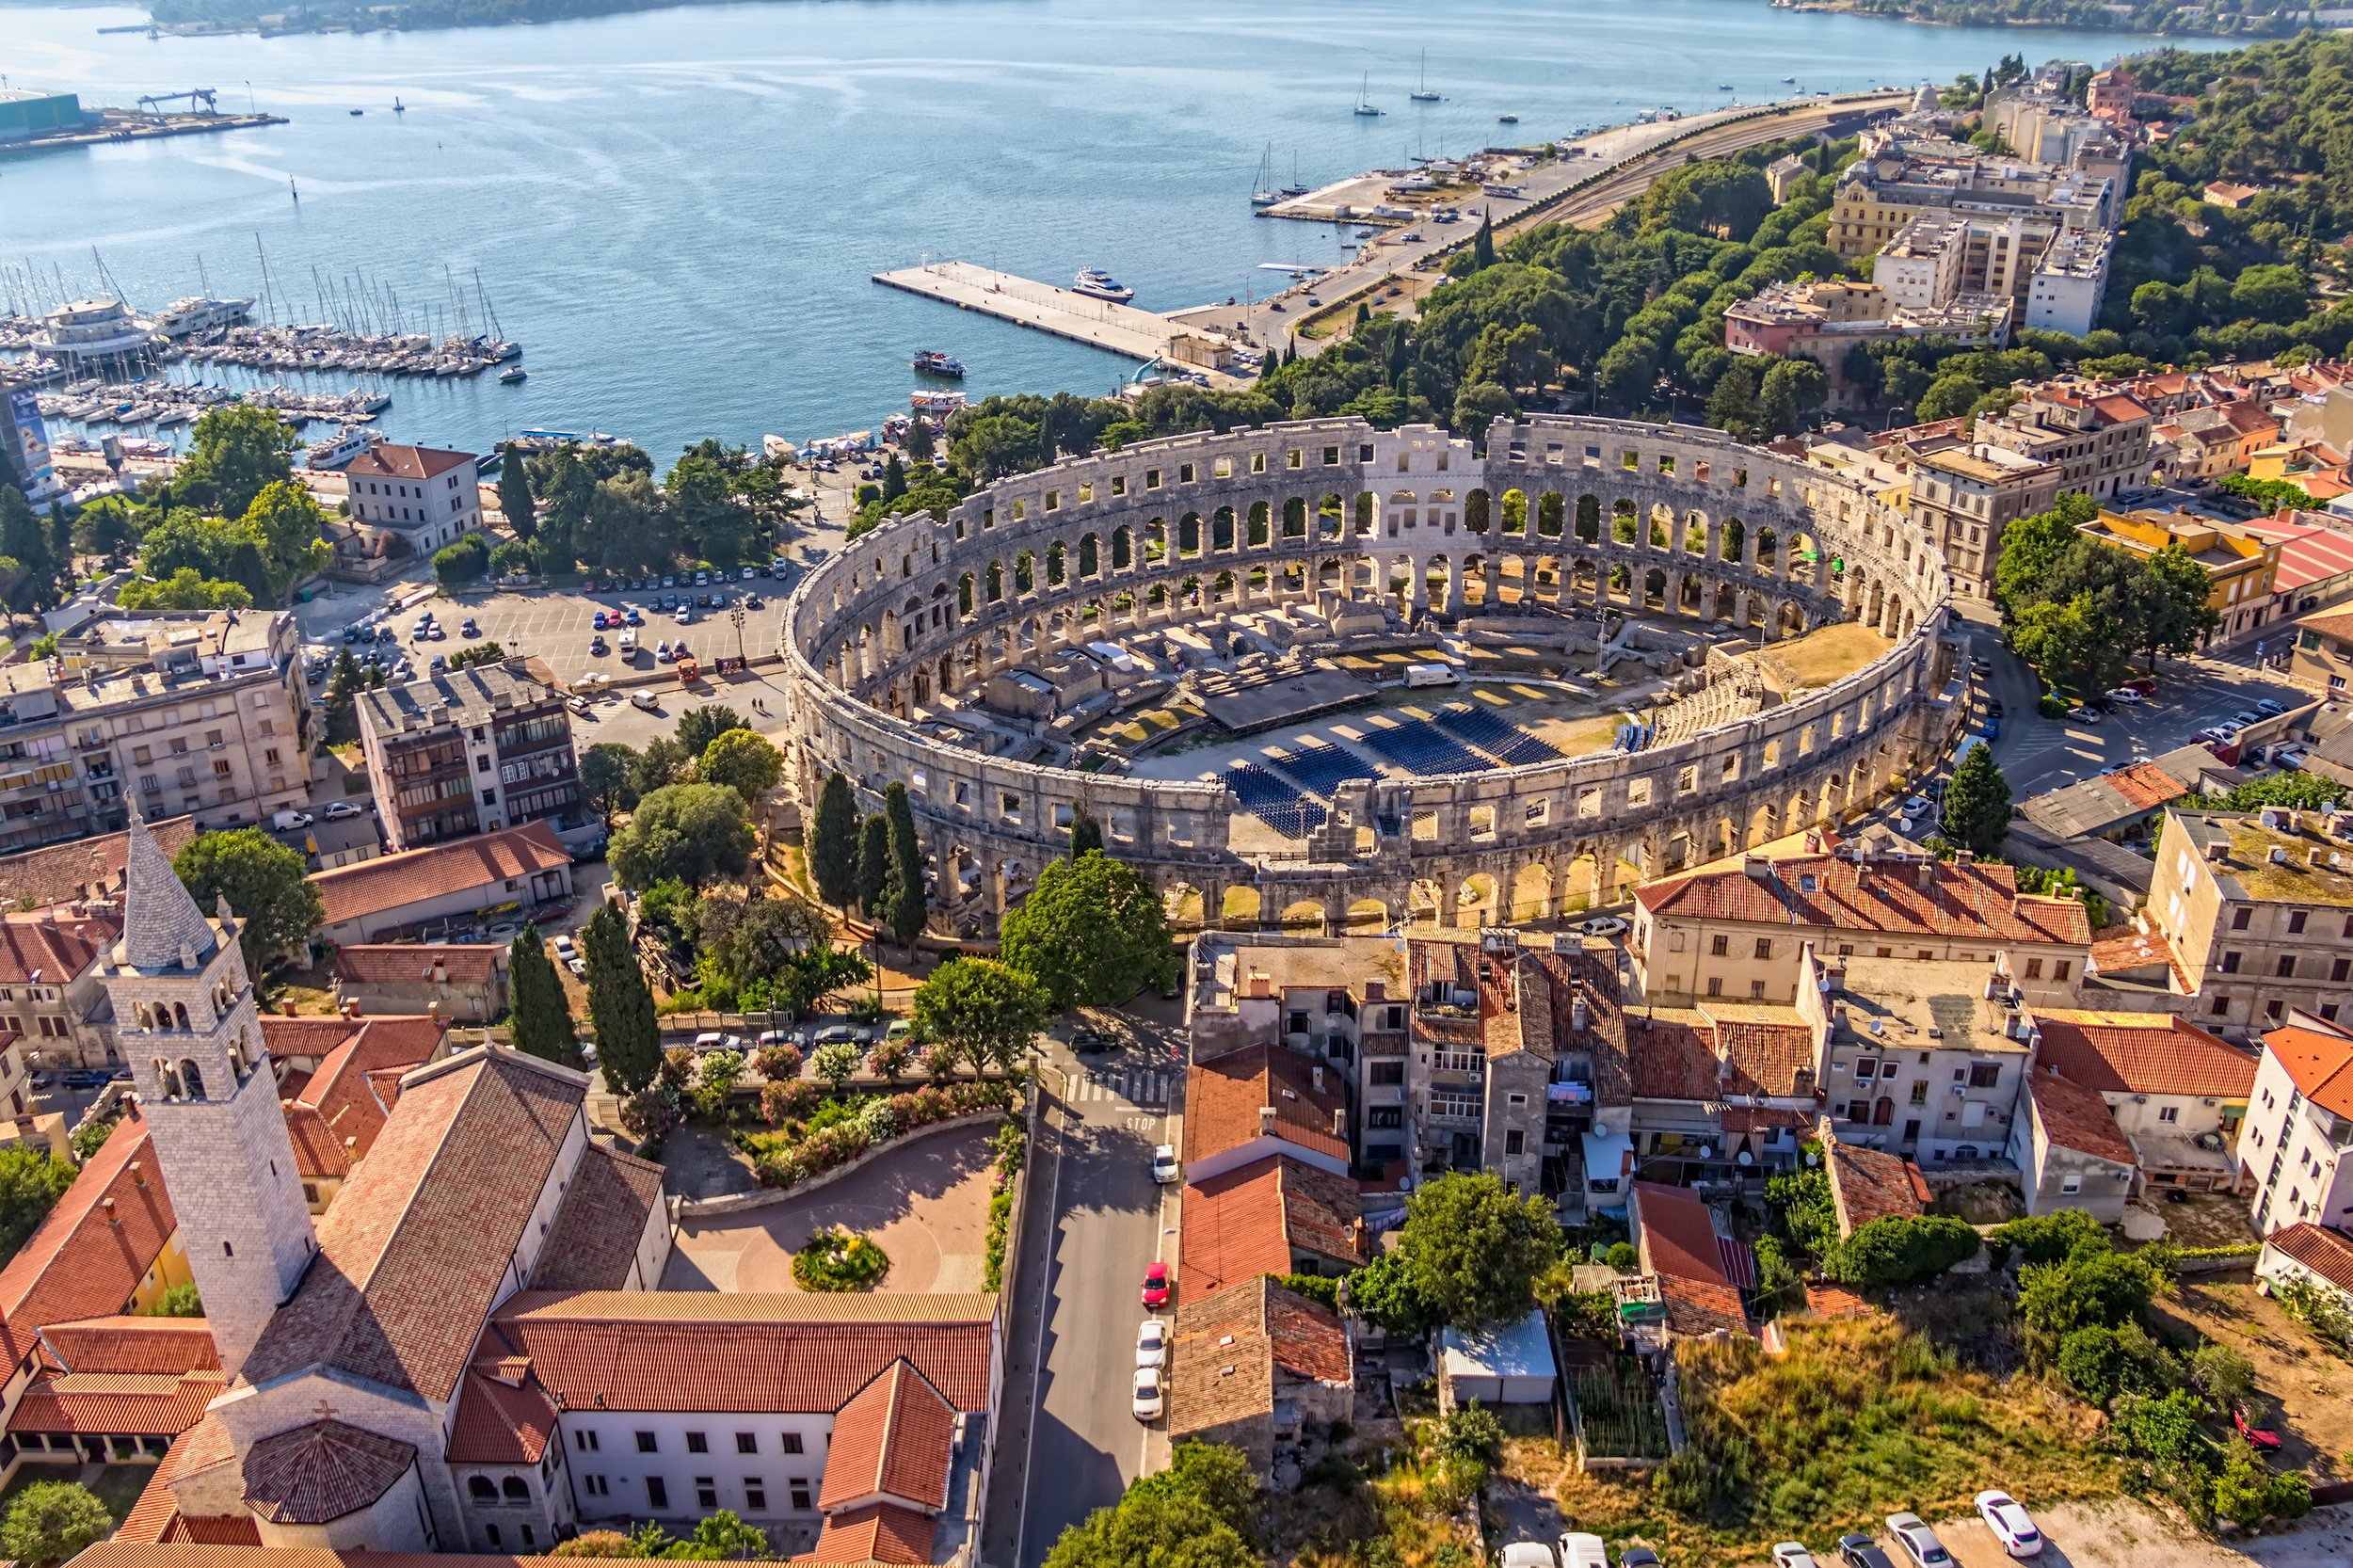 <p>The largest town on the Istria Peninsula and a decent-sized port, Pula is another common entry point for visitors flying into the country. It makes for a good base for exploring the peninsula, is home to numerous pizzerias, and is one of the best-preserved Roman arenas in Europe.</p><p><a href='https://www.msn.com/en-us/community/channel/vid-cj9pqbr0vn9in2b6ddcd8sfgpfq6x6utp44fssrv6mc2gtybw0us'>Follow us on MSN to see more of our exclusive lifestyle content.</a></p>